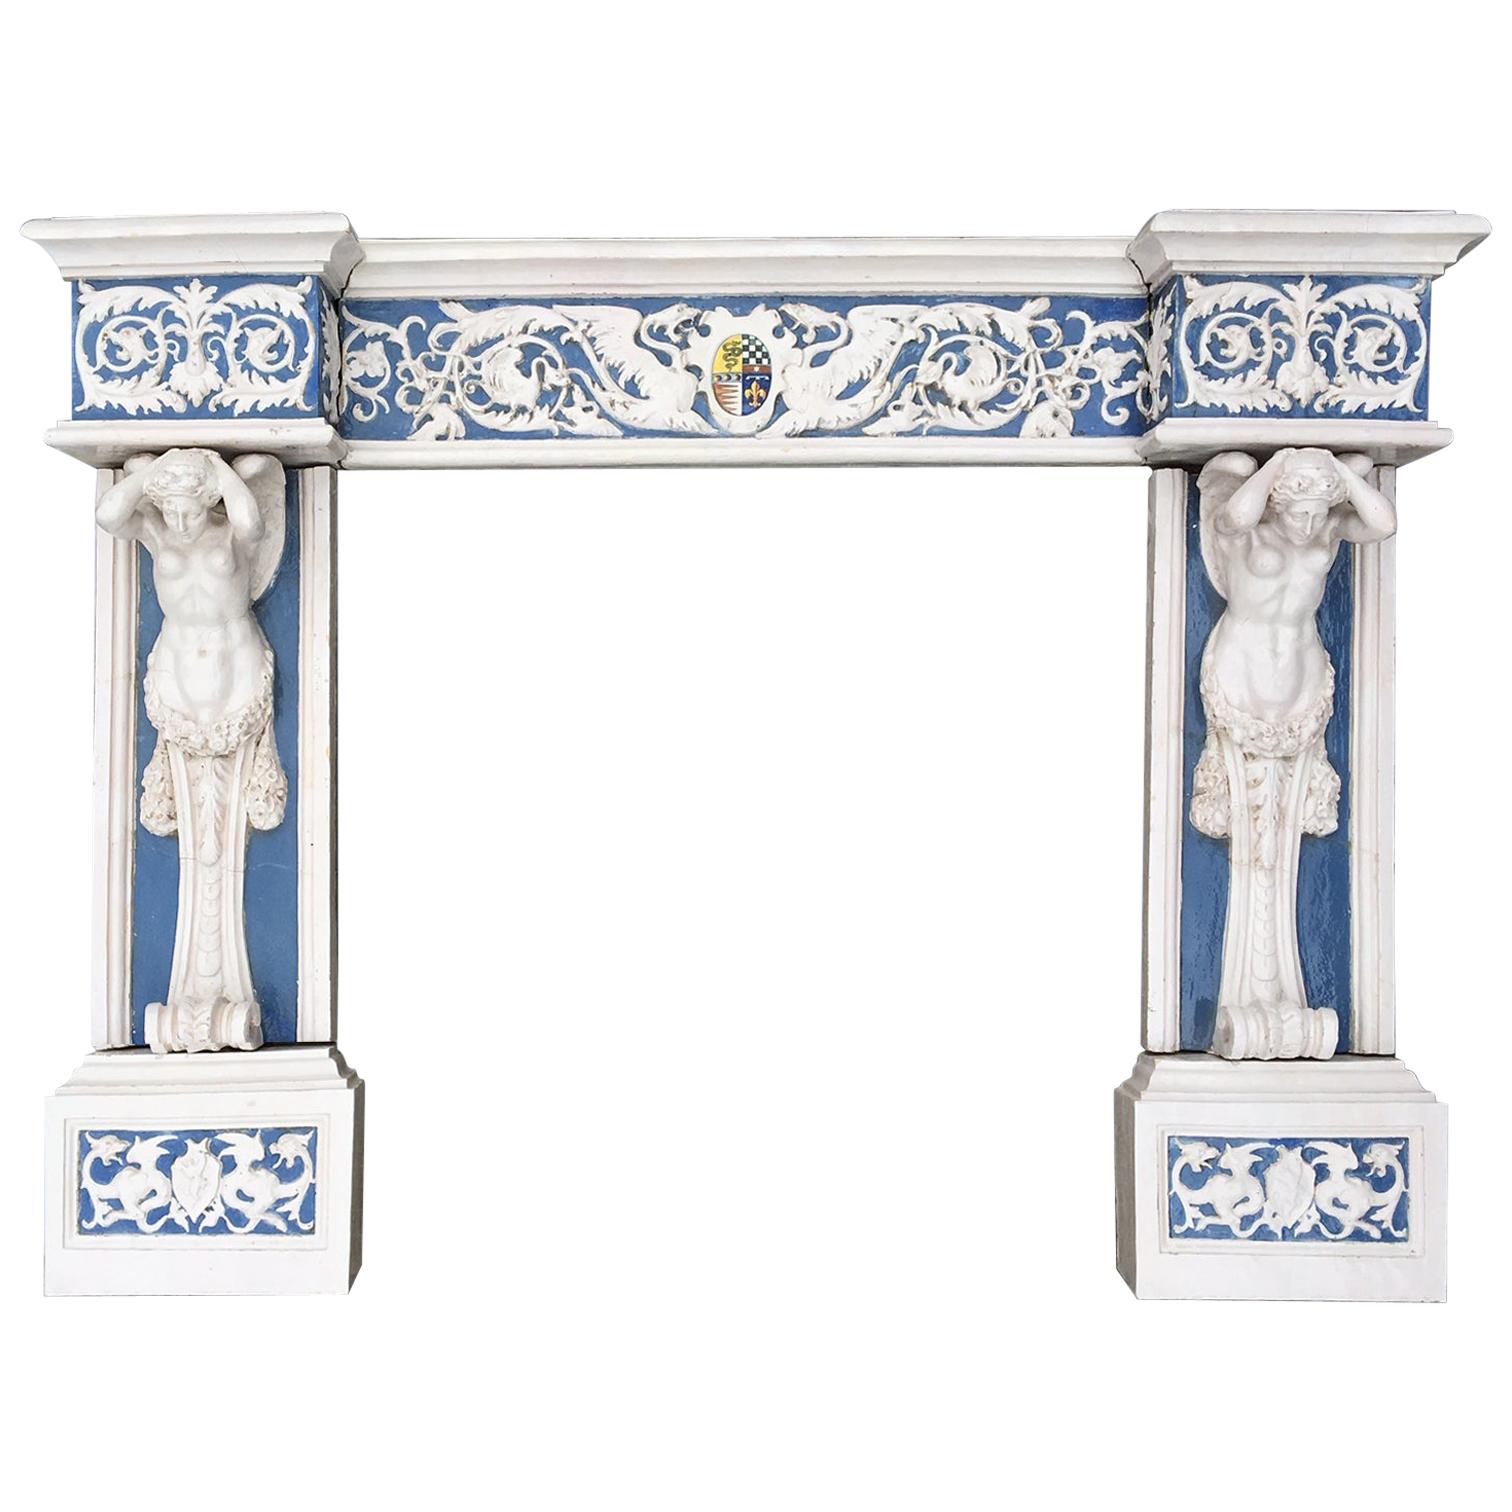 Cantagalli Fireplace Della Robbia Style 19th Century Blue and White Pottery For Sale